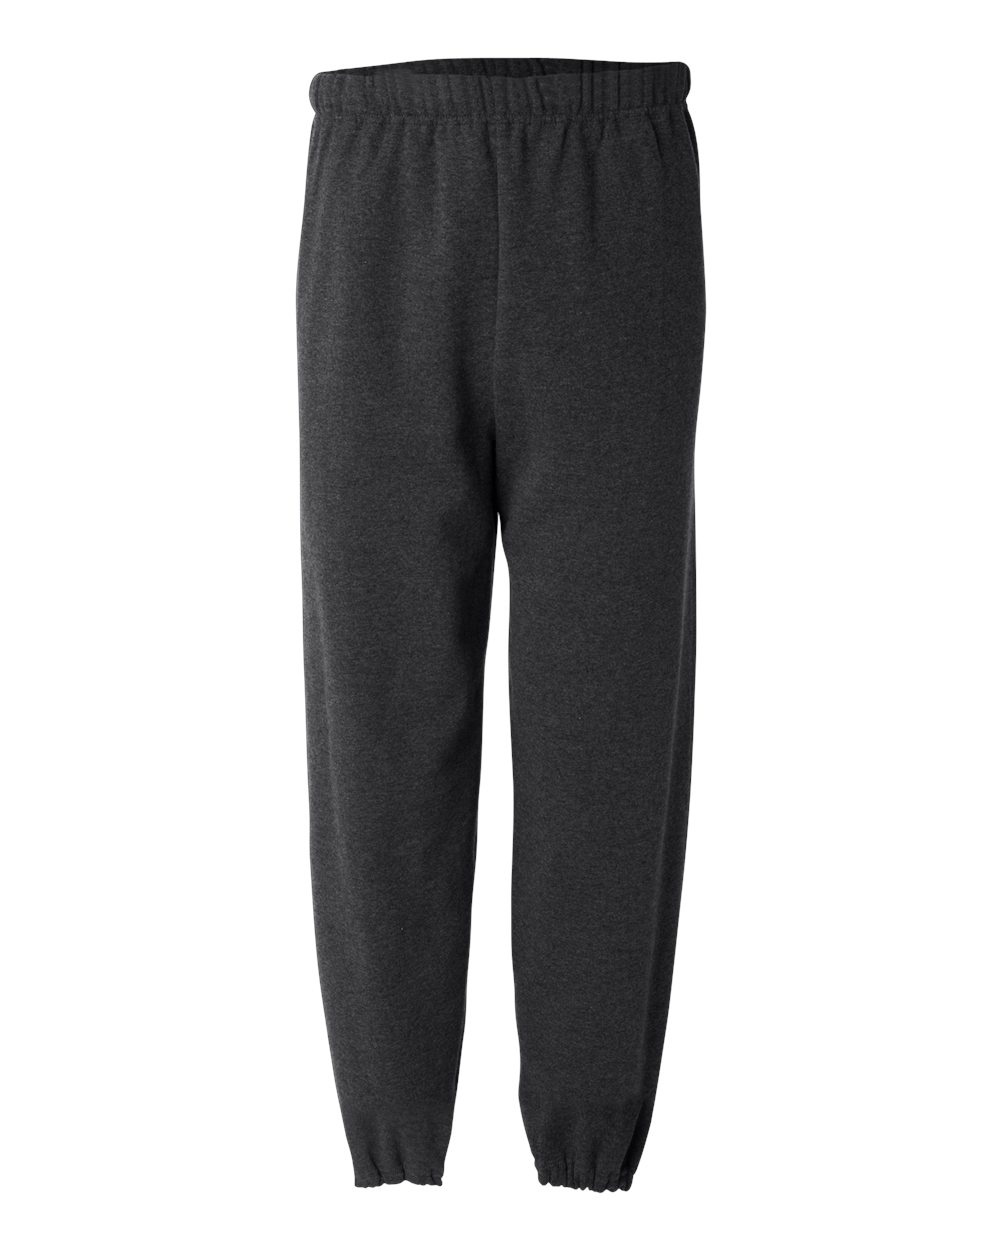 Sweatpants for Every Occasion For Adult | RADYAN®